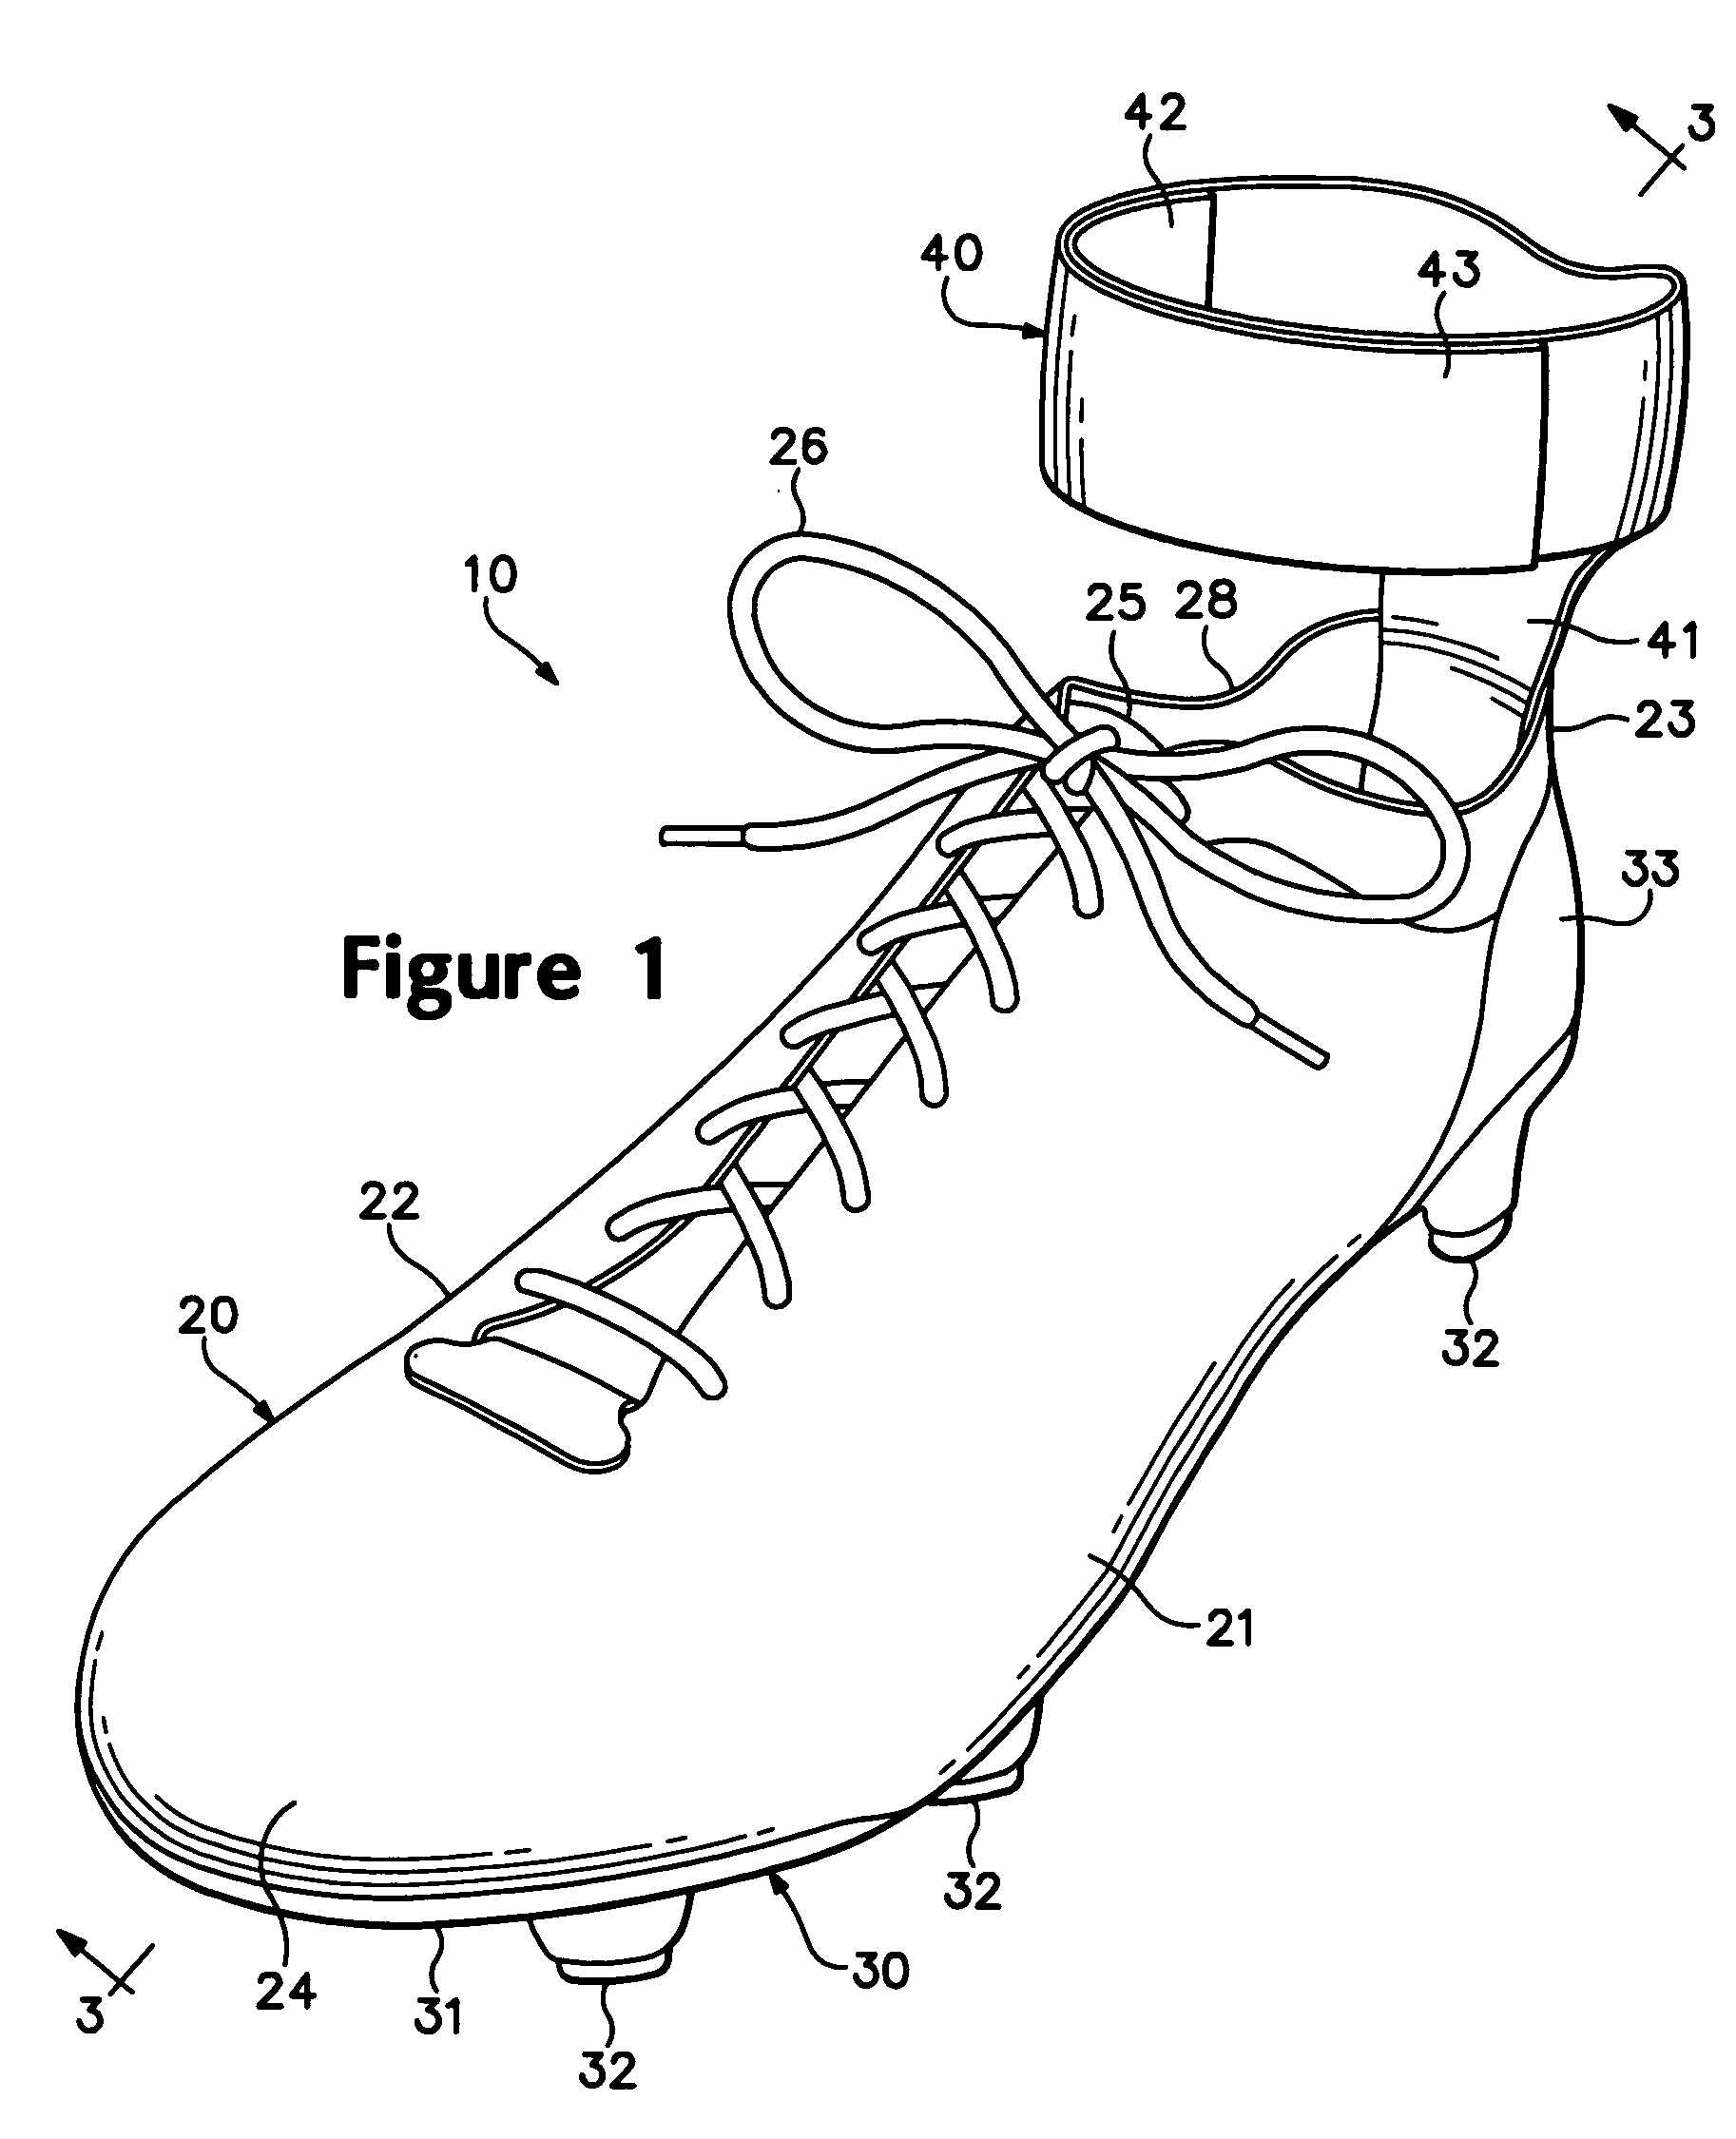 Article of athletic footwear with a leash